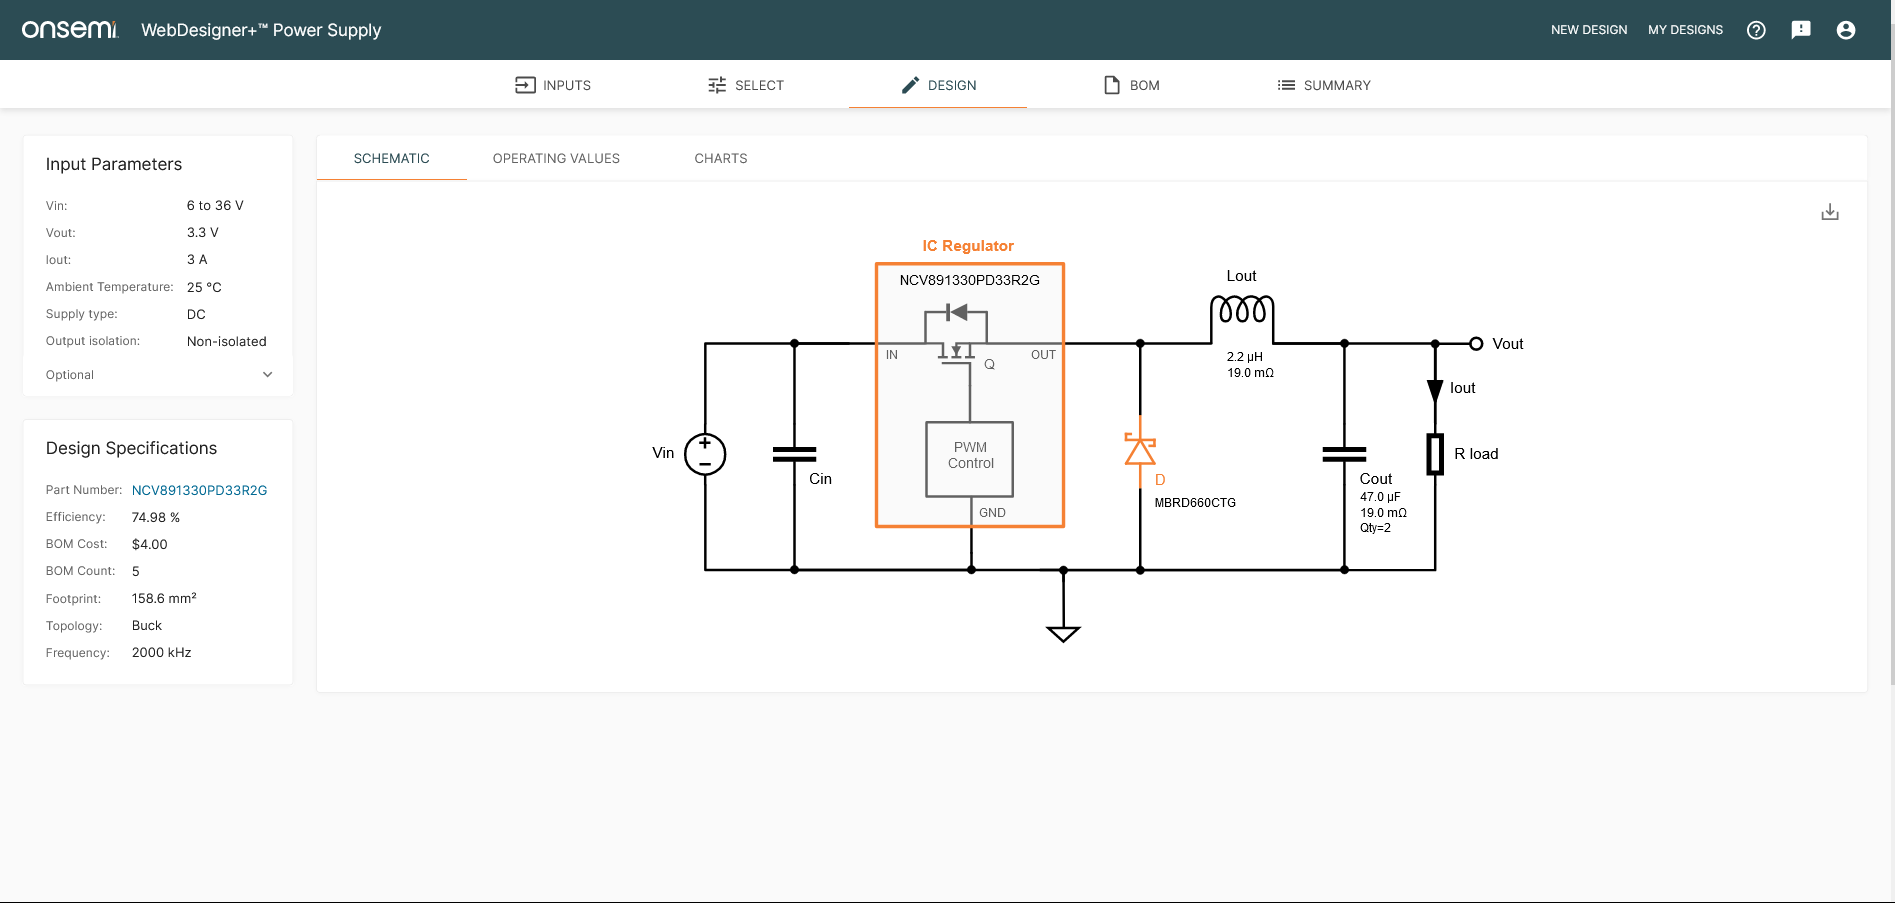 DESIGN tab showing the schematic in the WebDesigner+ Power Supply.